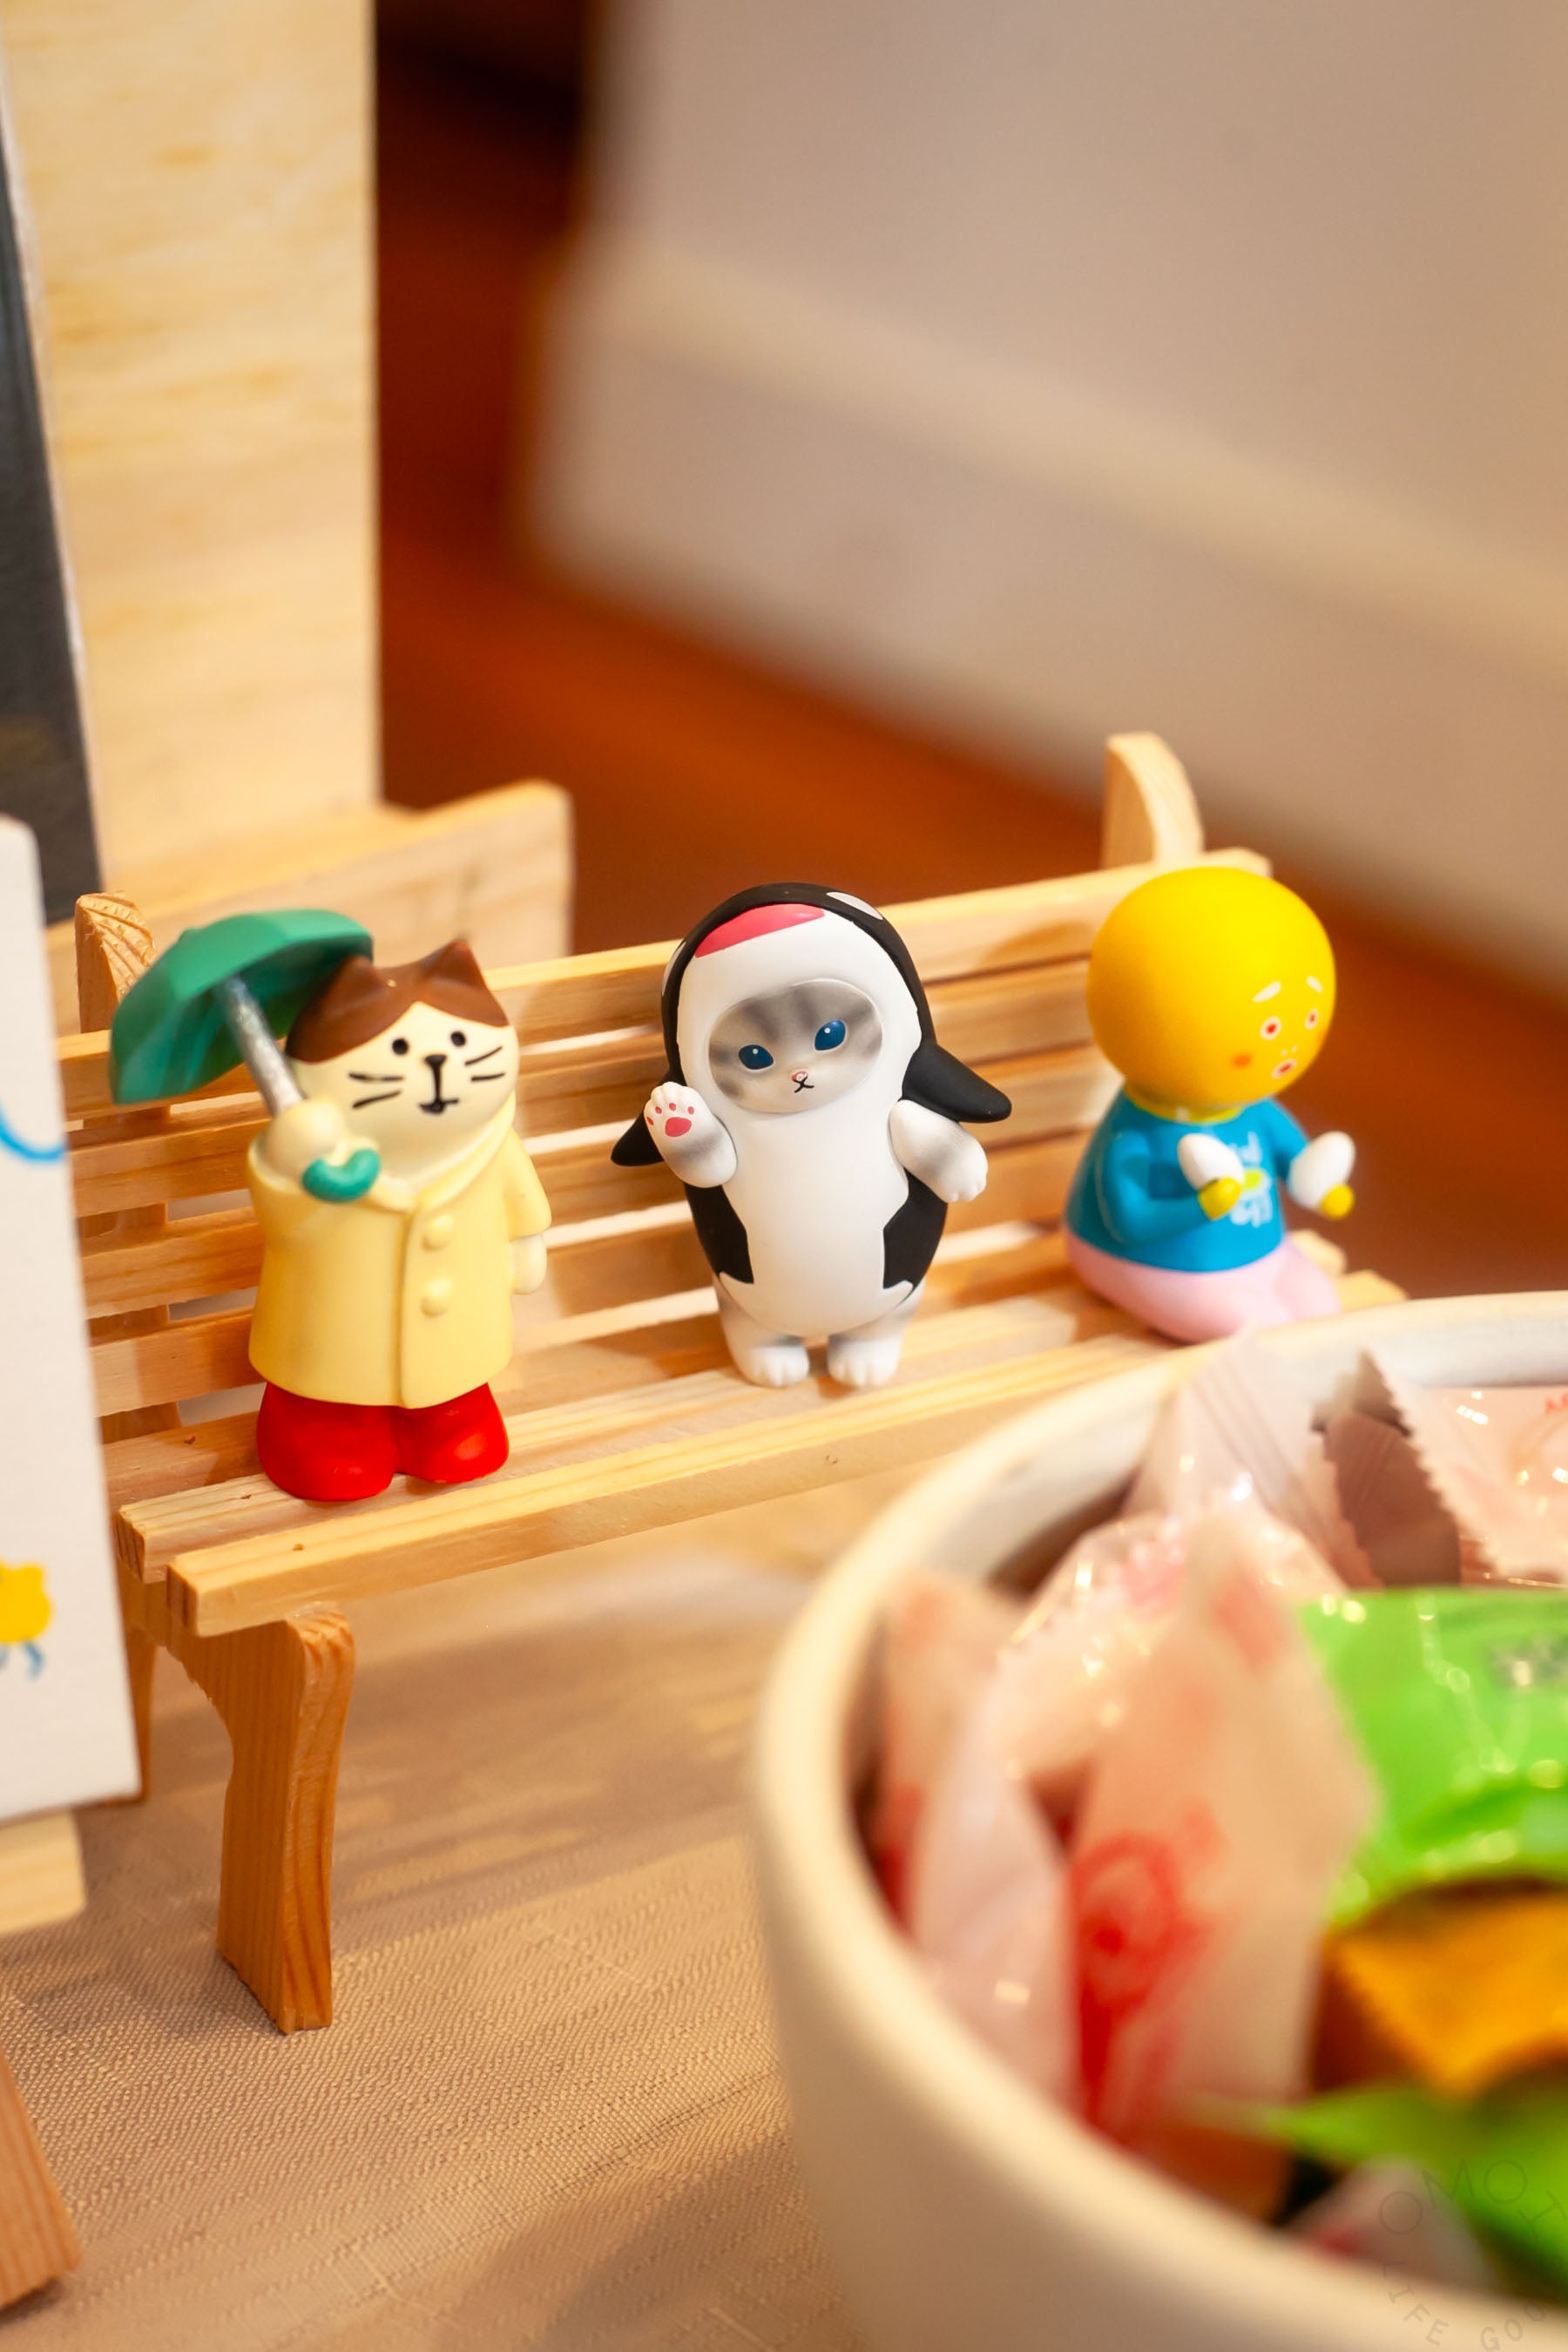 Hannah's table had this ADORABLE mini bench setup featuring blind box toys that OMOI has sold in the past.